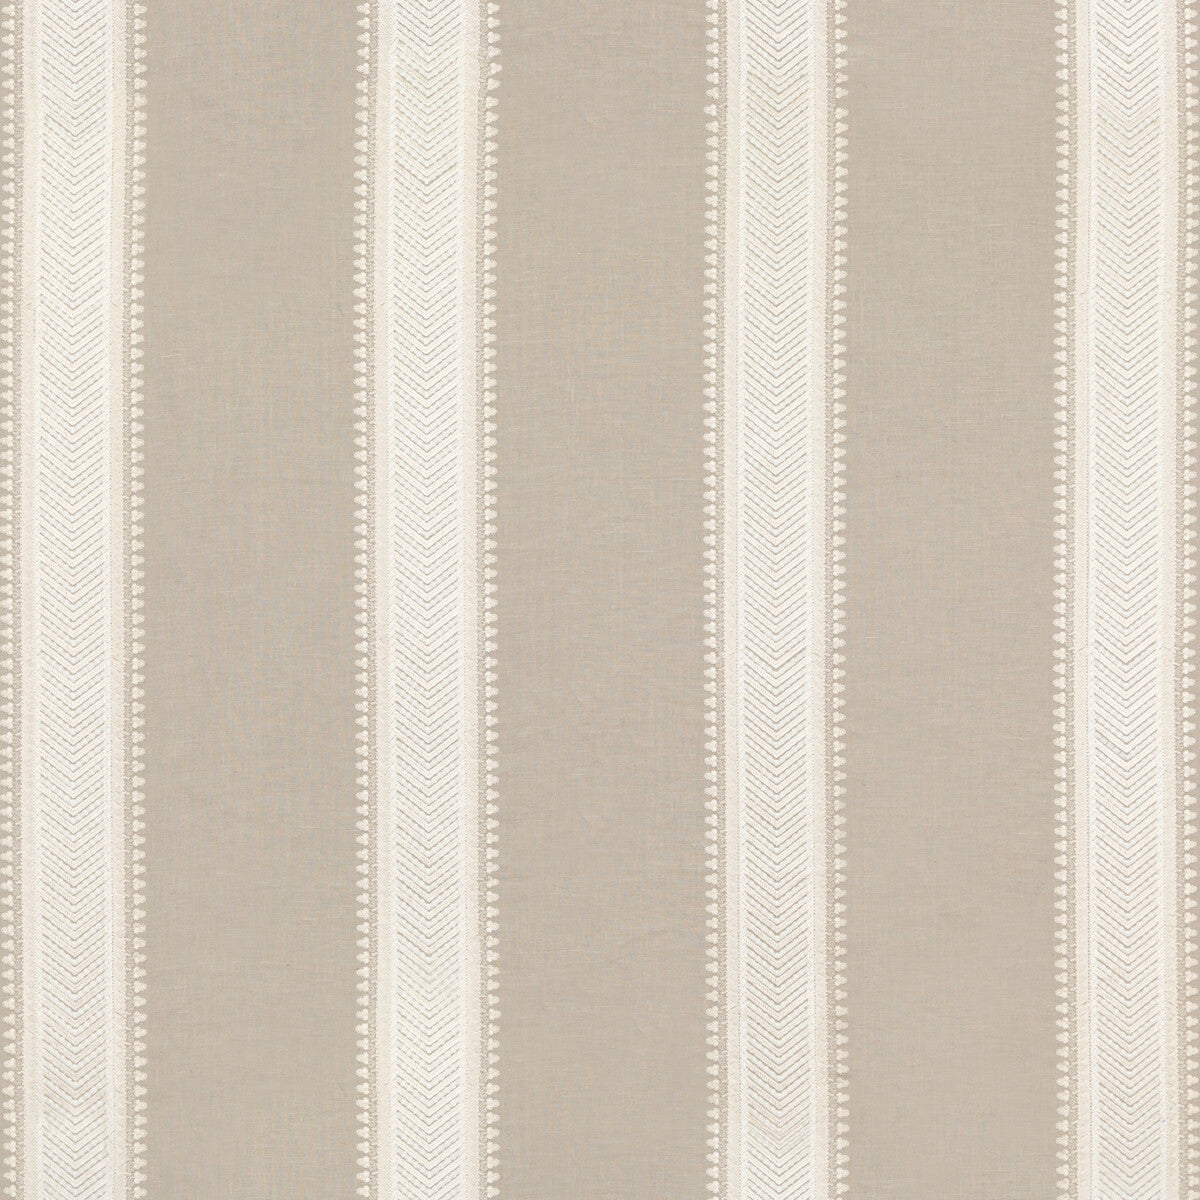 Kerris Stripe fabric in dove color - pattern BF10799.3.0 - by G P &amp; J Baker in the Artisan II collection